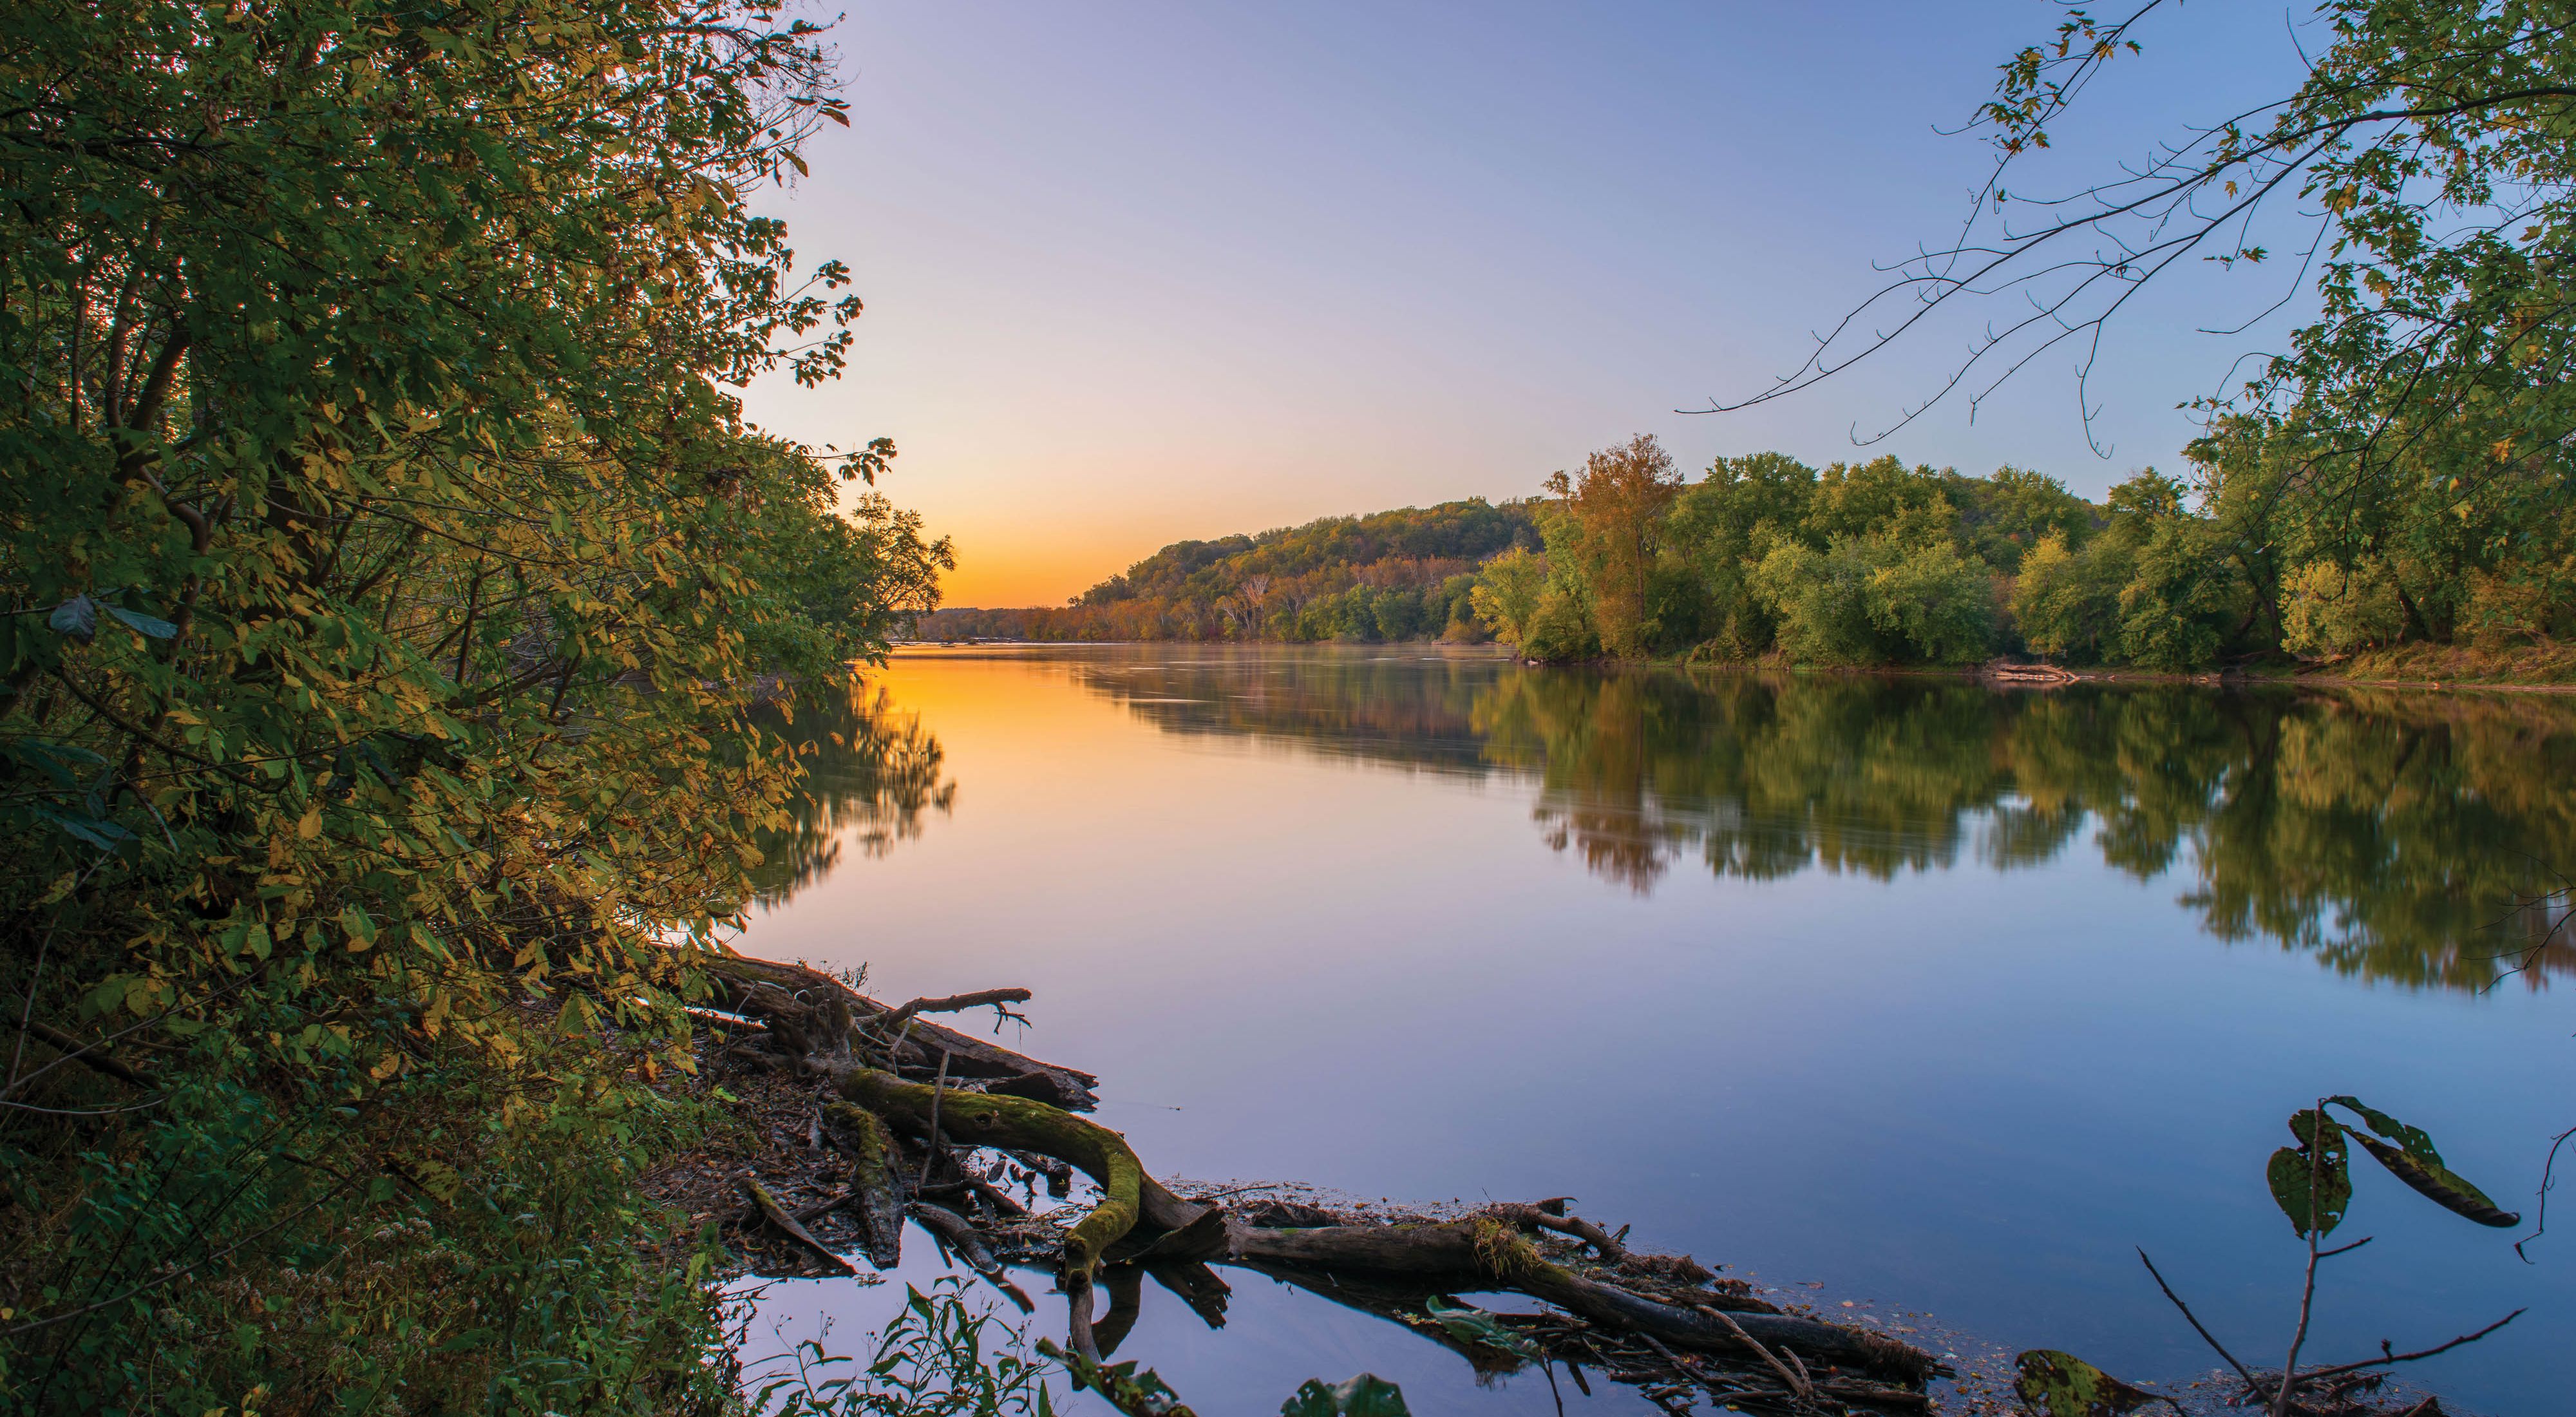 The Potomac River runs through Virginia's Fraser Preserve. The tree lined banks are reflected in the mirror-like surface of the water as the horizon glows in the light of the rising sun.